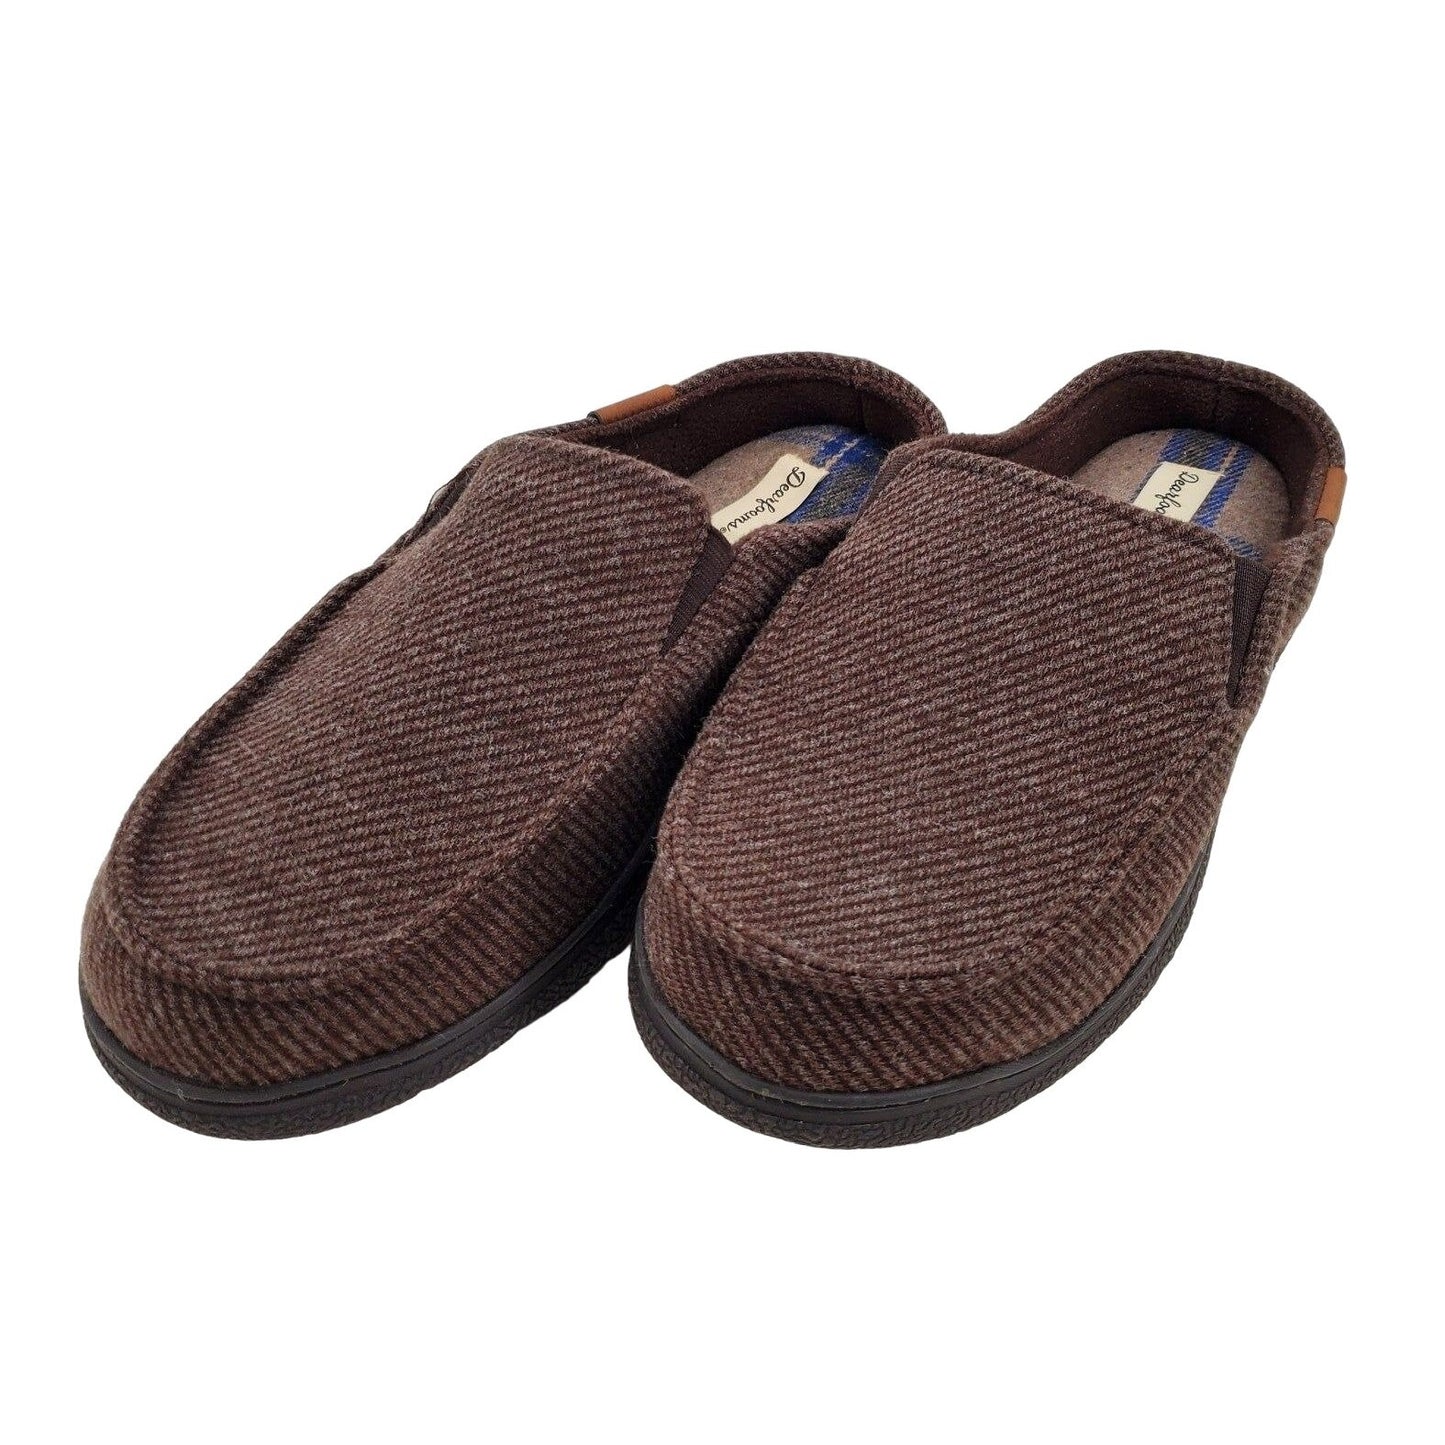 DEARFOAM Loafer Slippers Men's Indoor Outdoor Leisure House shoes